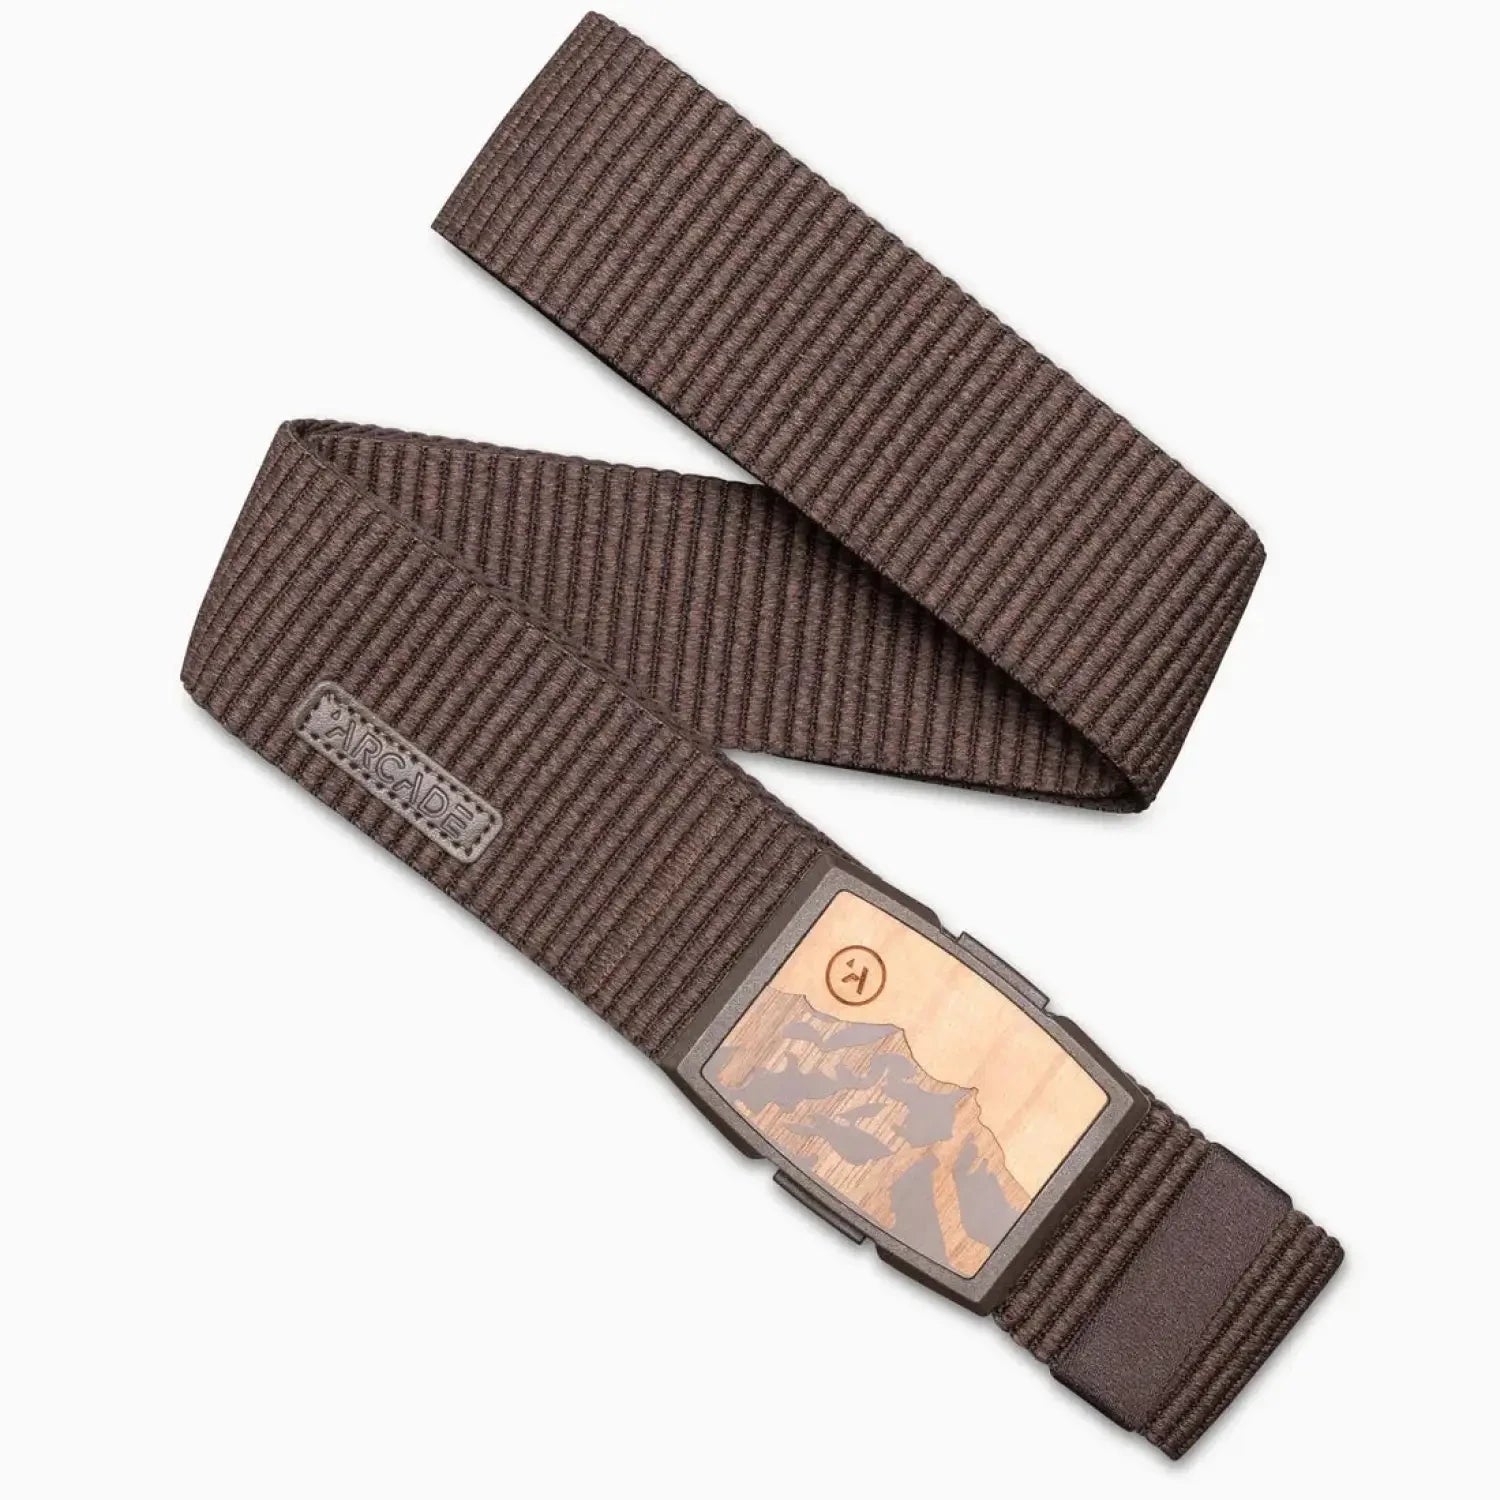 Arcade Belt Co. Woody Belt shown in the Heather Walnut color option.